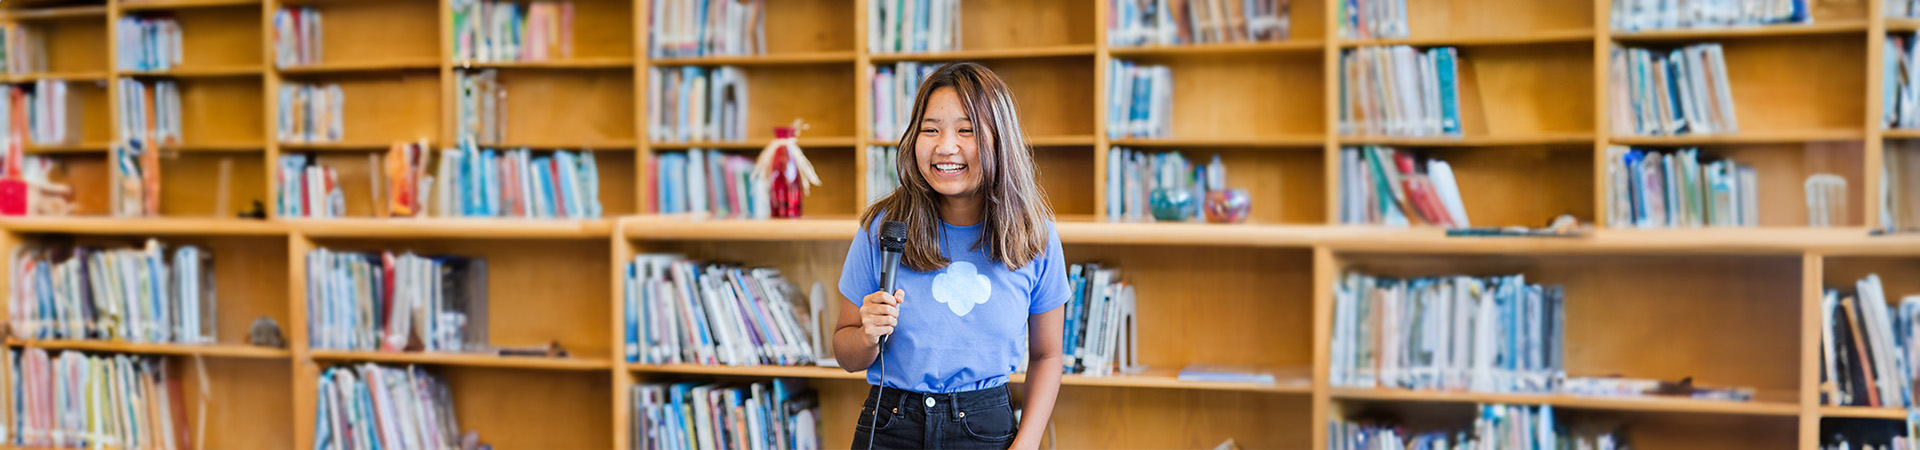  A Girl Scout Senior standing in a library holding a microphone 